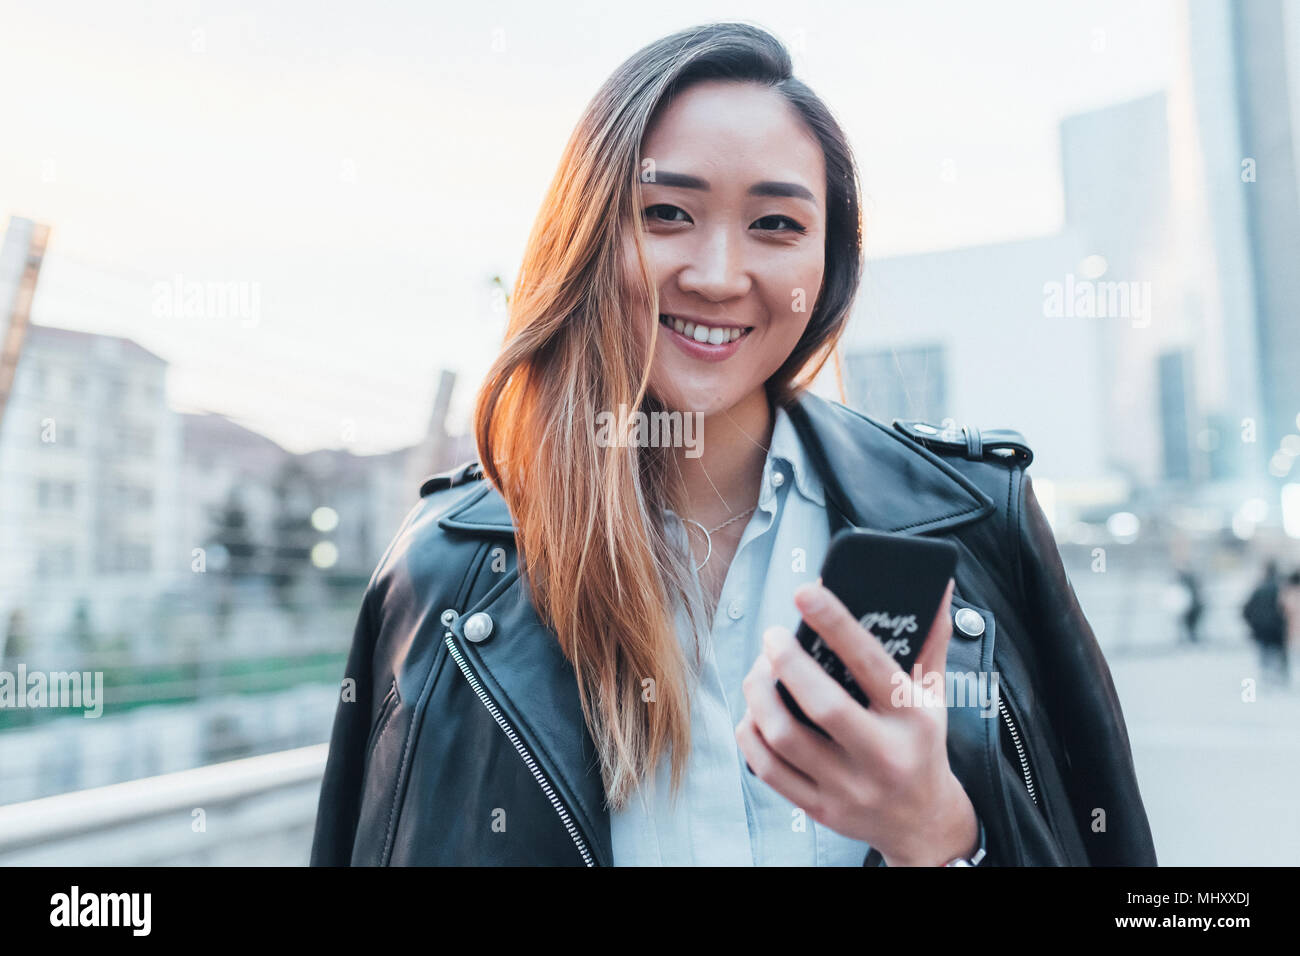 Portrait of businesswoman outdoors, holding smartphone, smiling Stock Photo